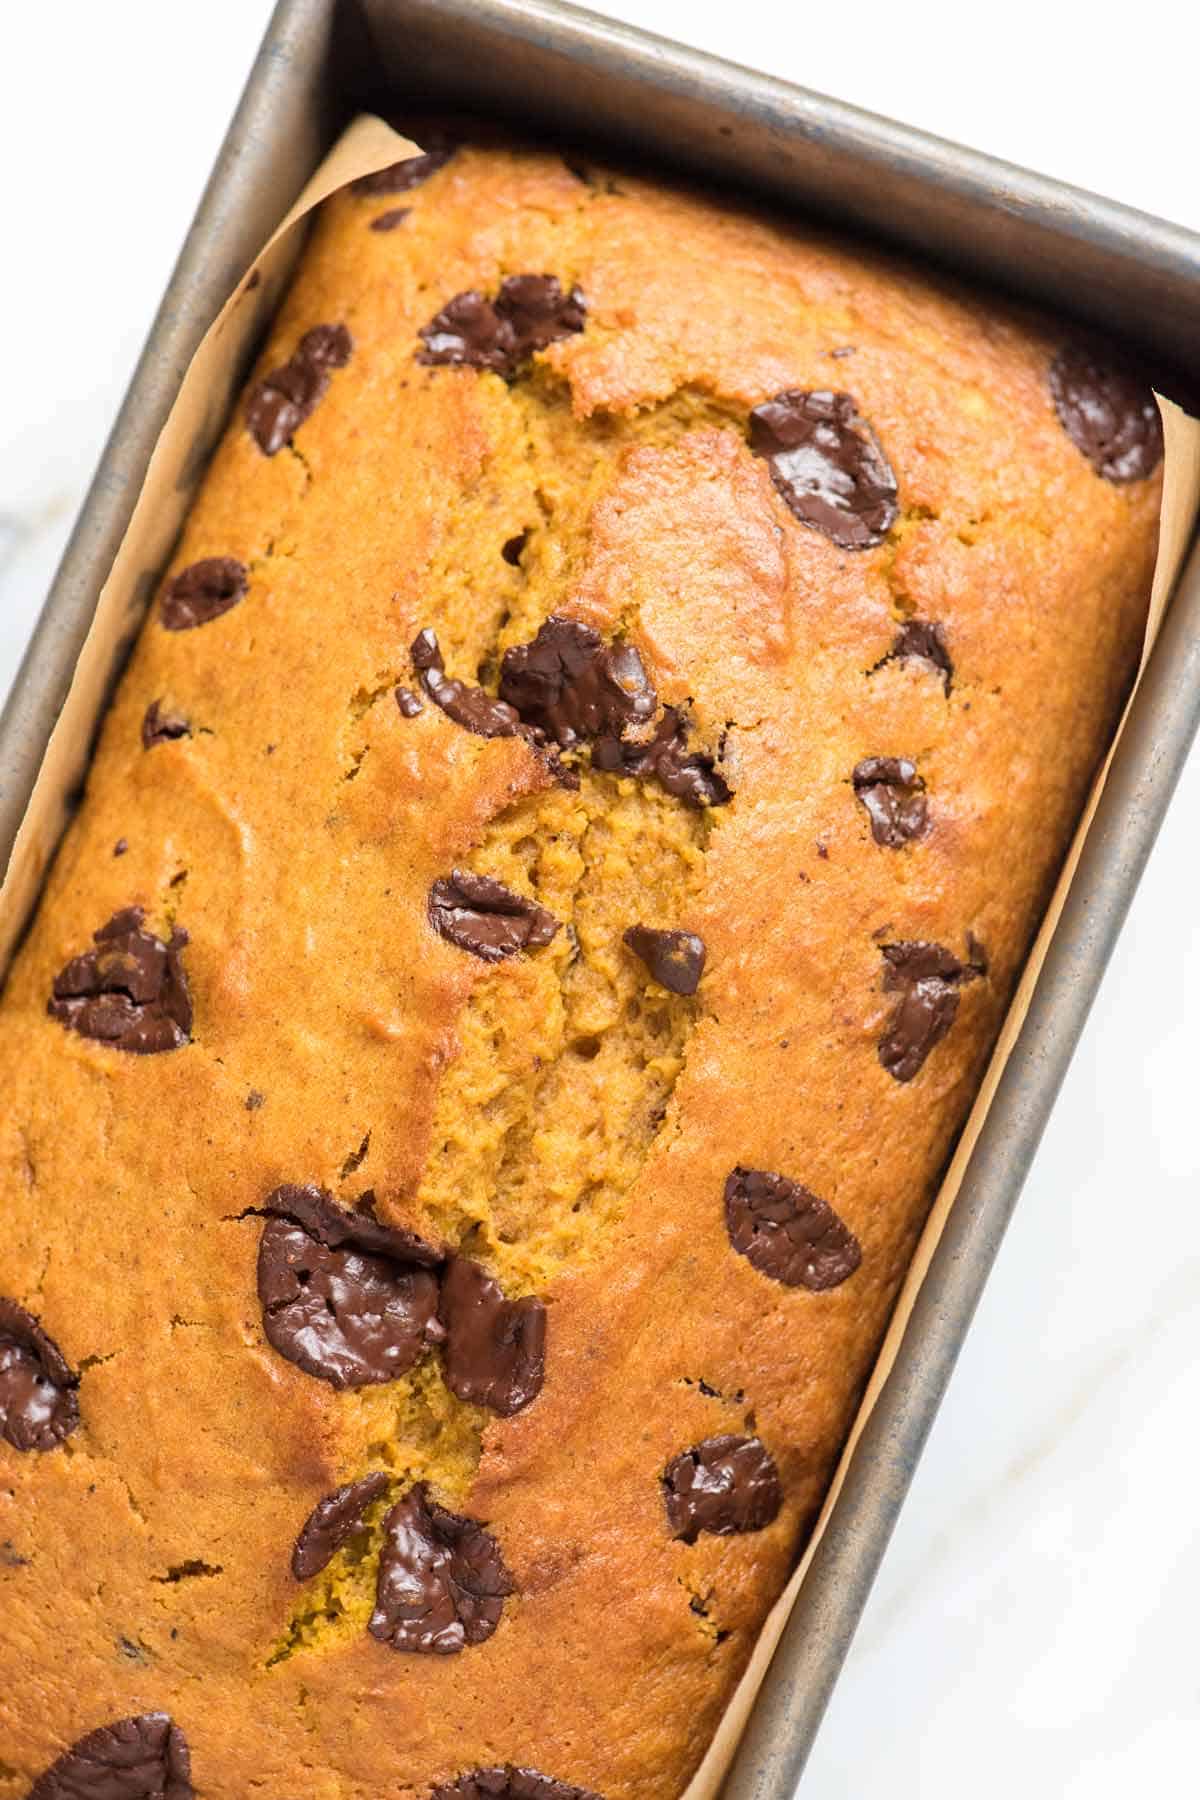 You Need This Chocolate Orange Pumpkin Bread in Your Life